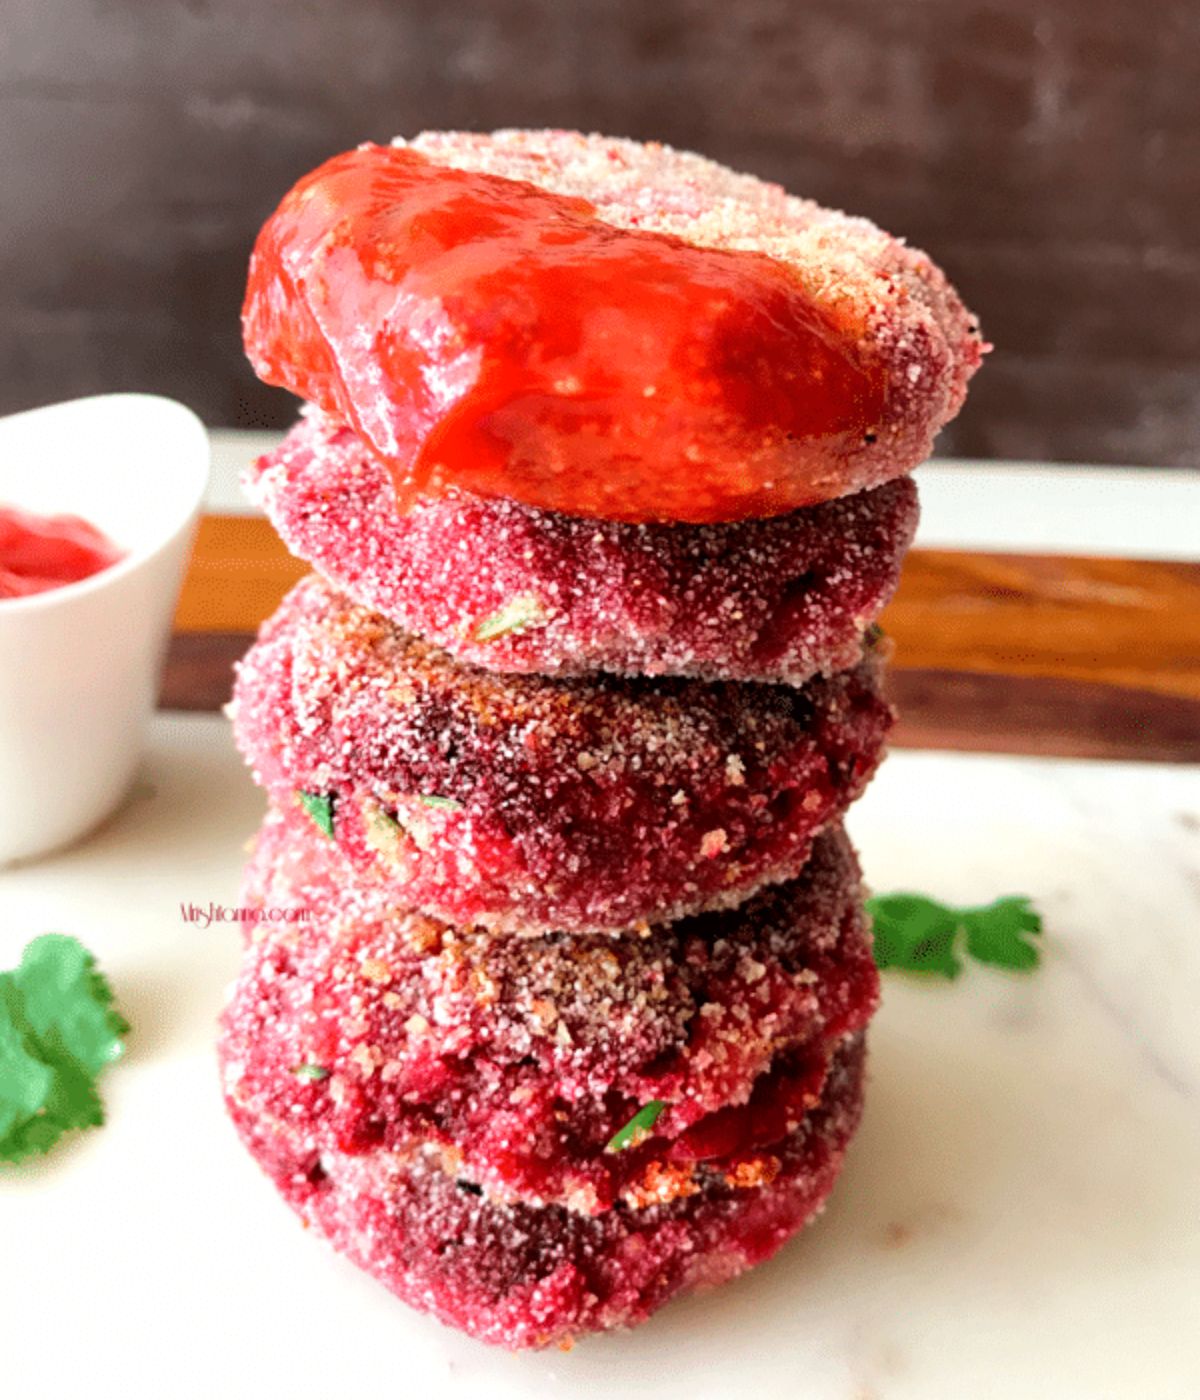 Four beetroot cutlets are stacked and dipped in to tomato ketchup.